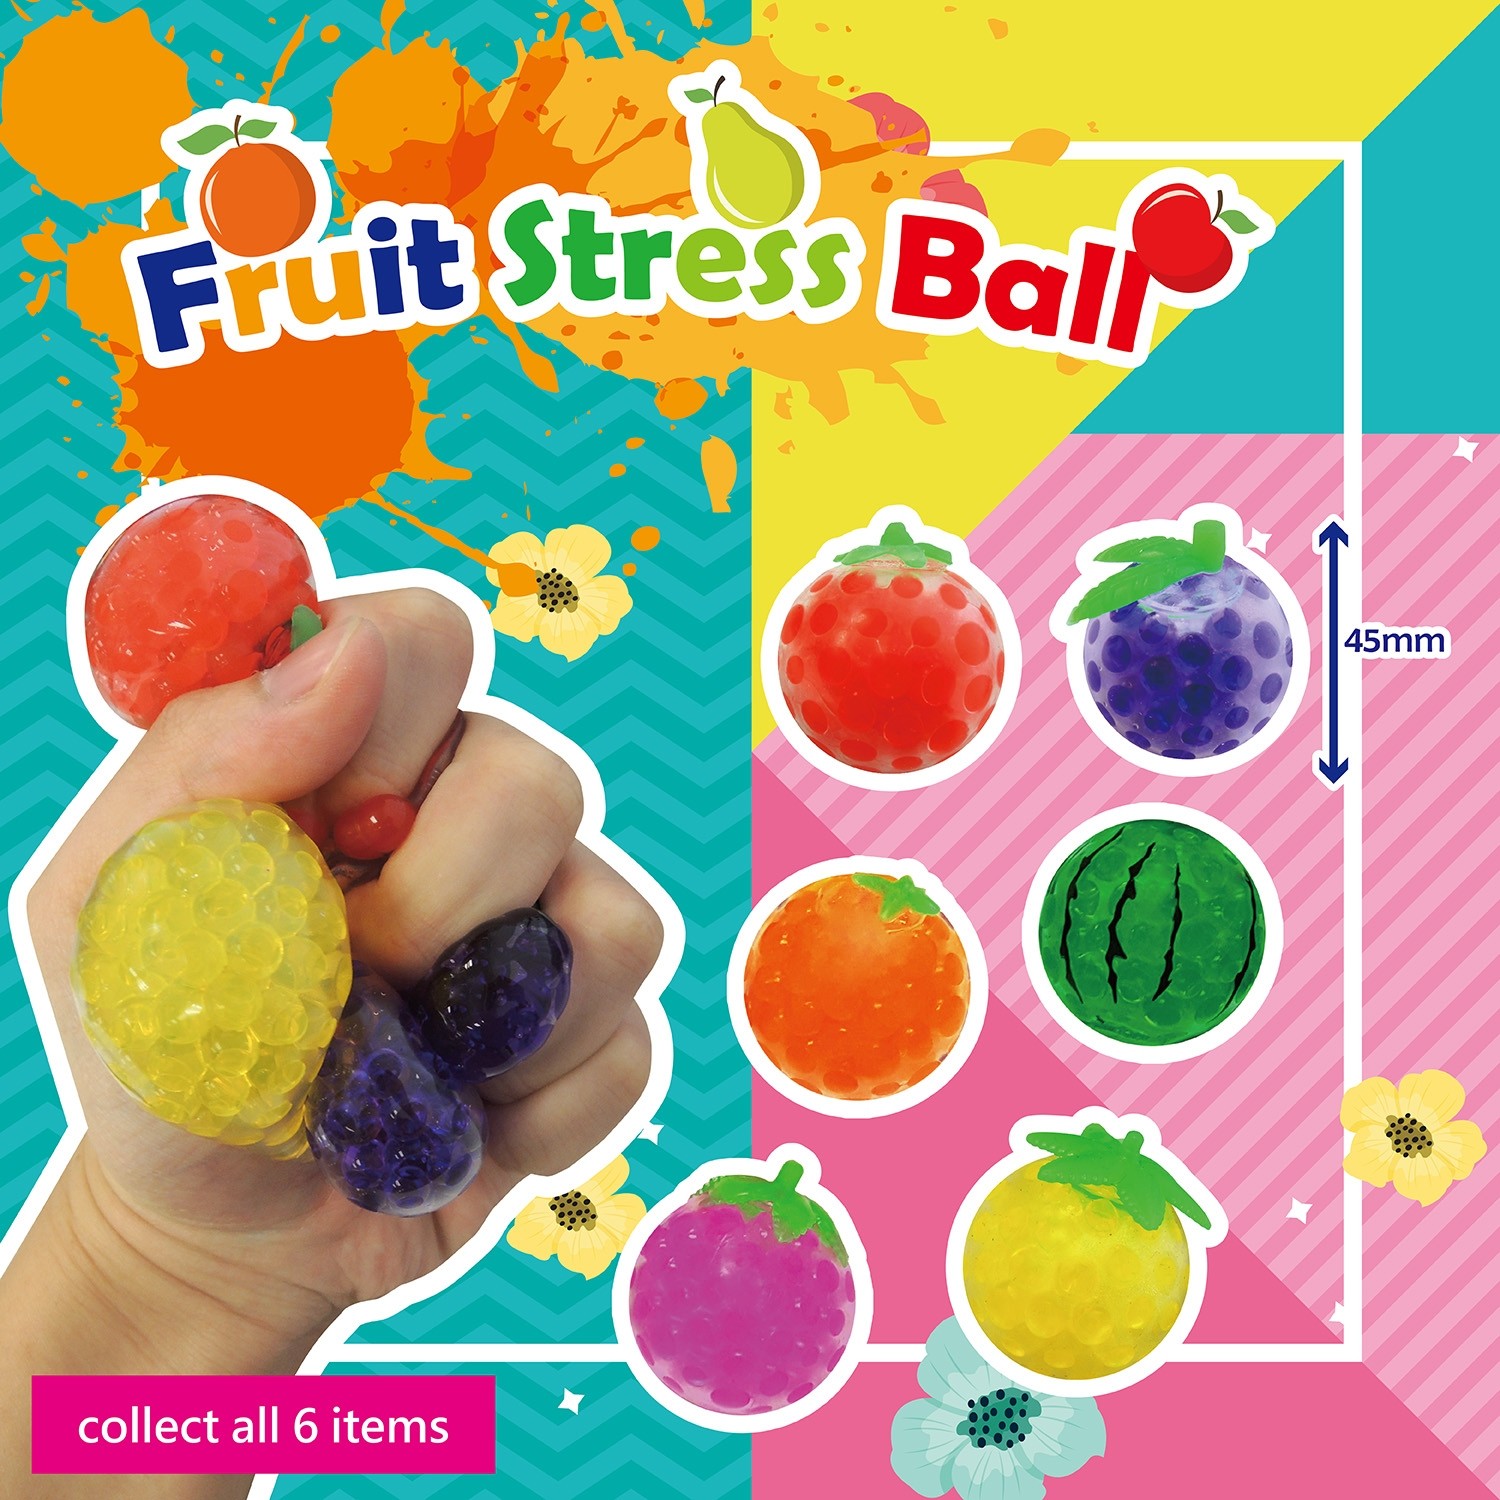 Fruit Stress Ball - Forever Shiny Limited, specialize in small